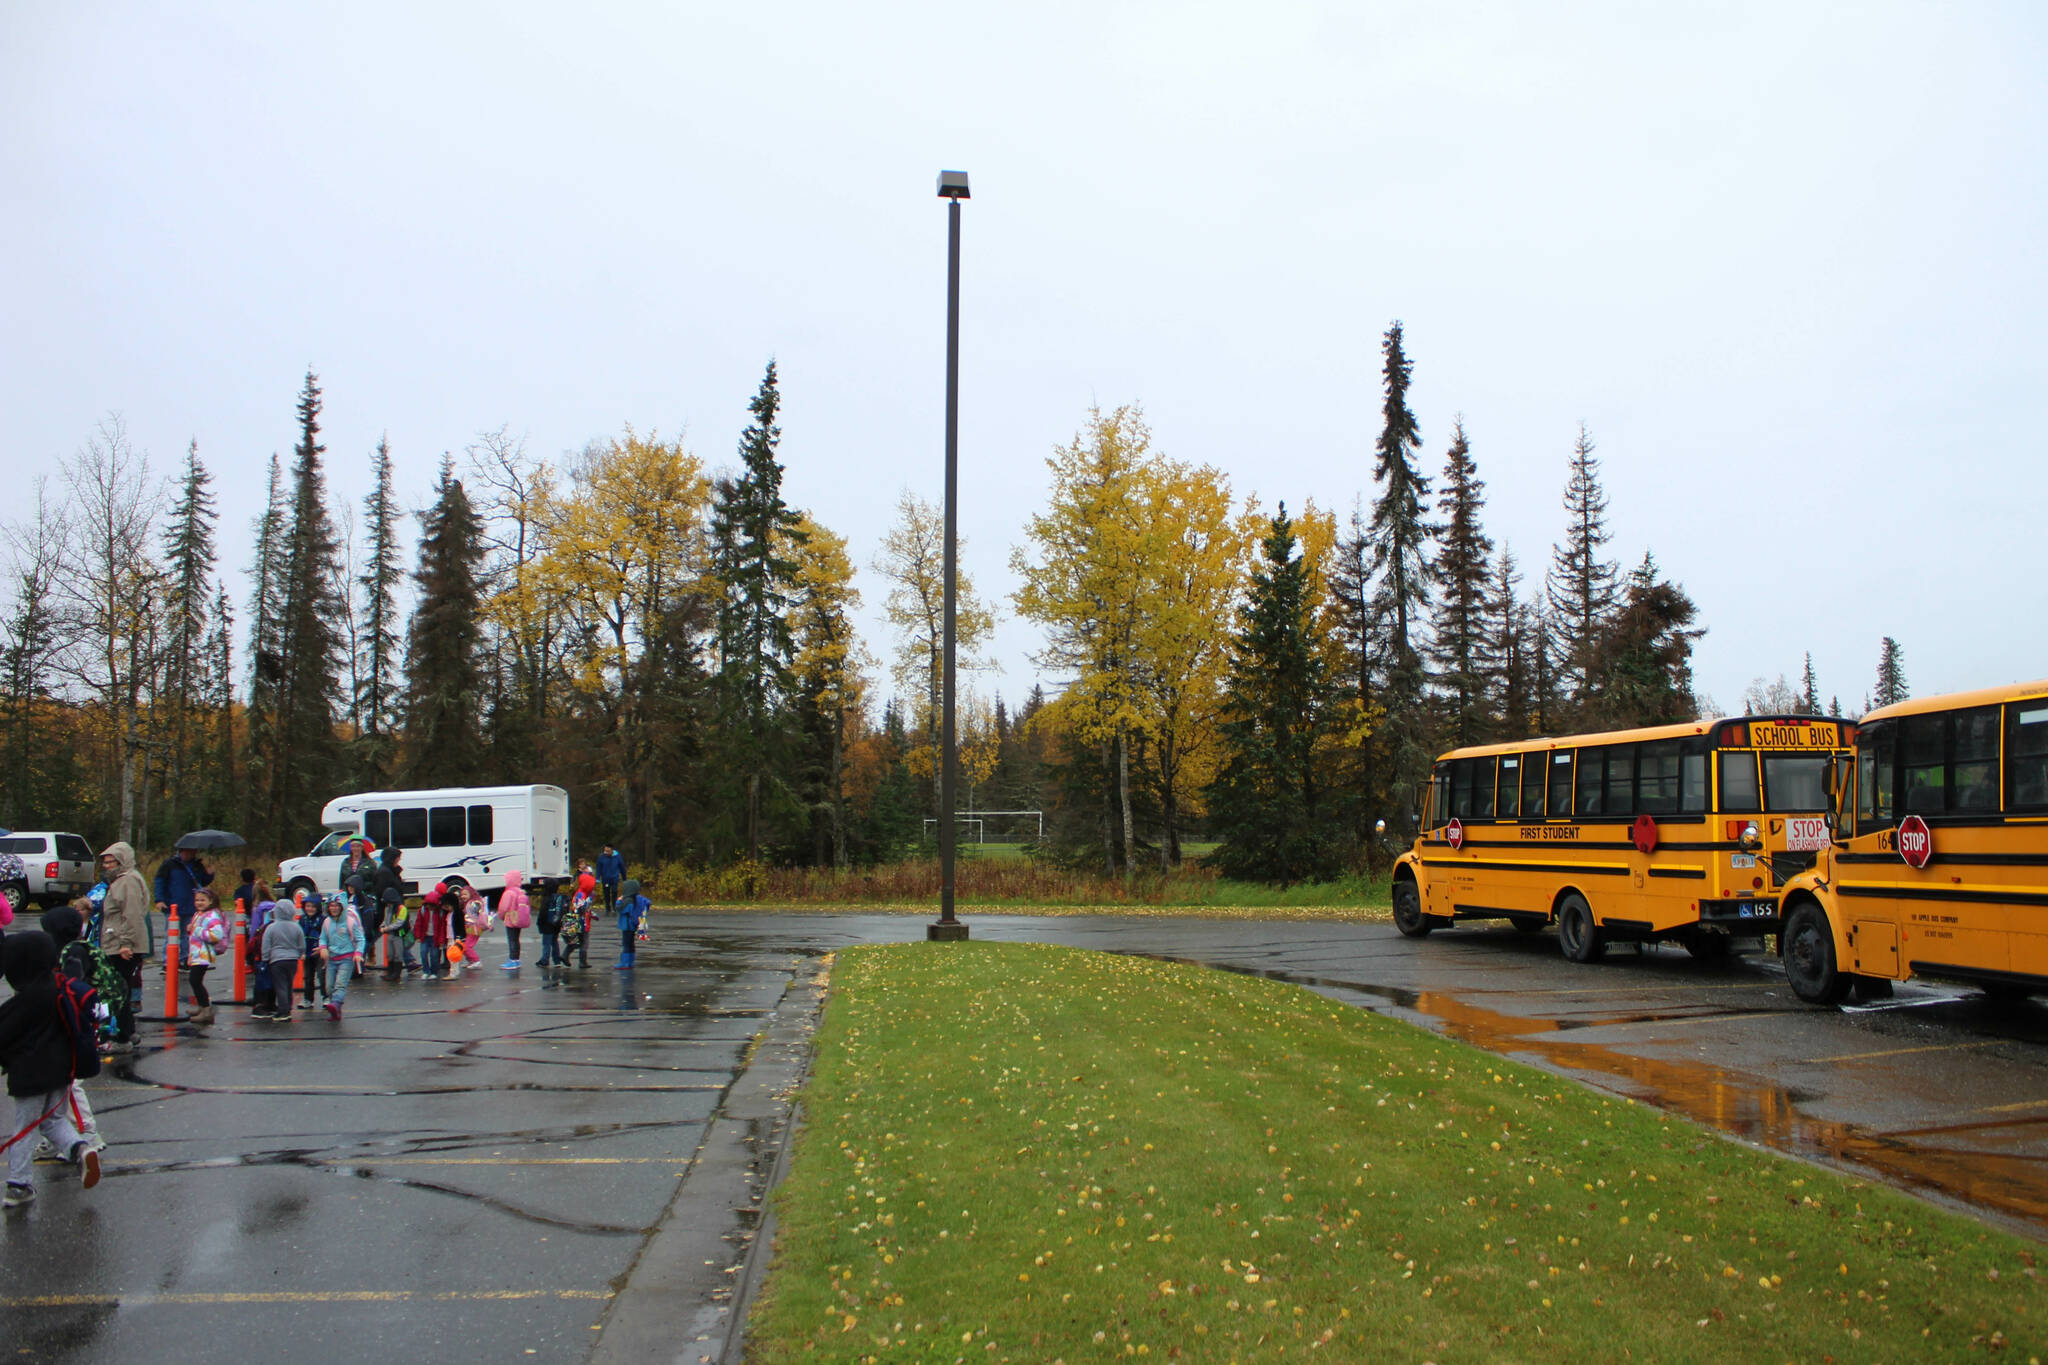 Students wait to be picked up near school buses outside of Mountain View Elementary School on Thursday, September 29, 2022, in Kenai, Alaska. A bond package up for consideration by Kenai Peninsula Borough voters on Oct. 4 would fund improvements to the school’s traffic flow. (Ashlyn O’Hara/Peninsula Clarion)